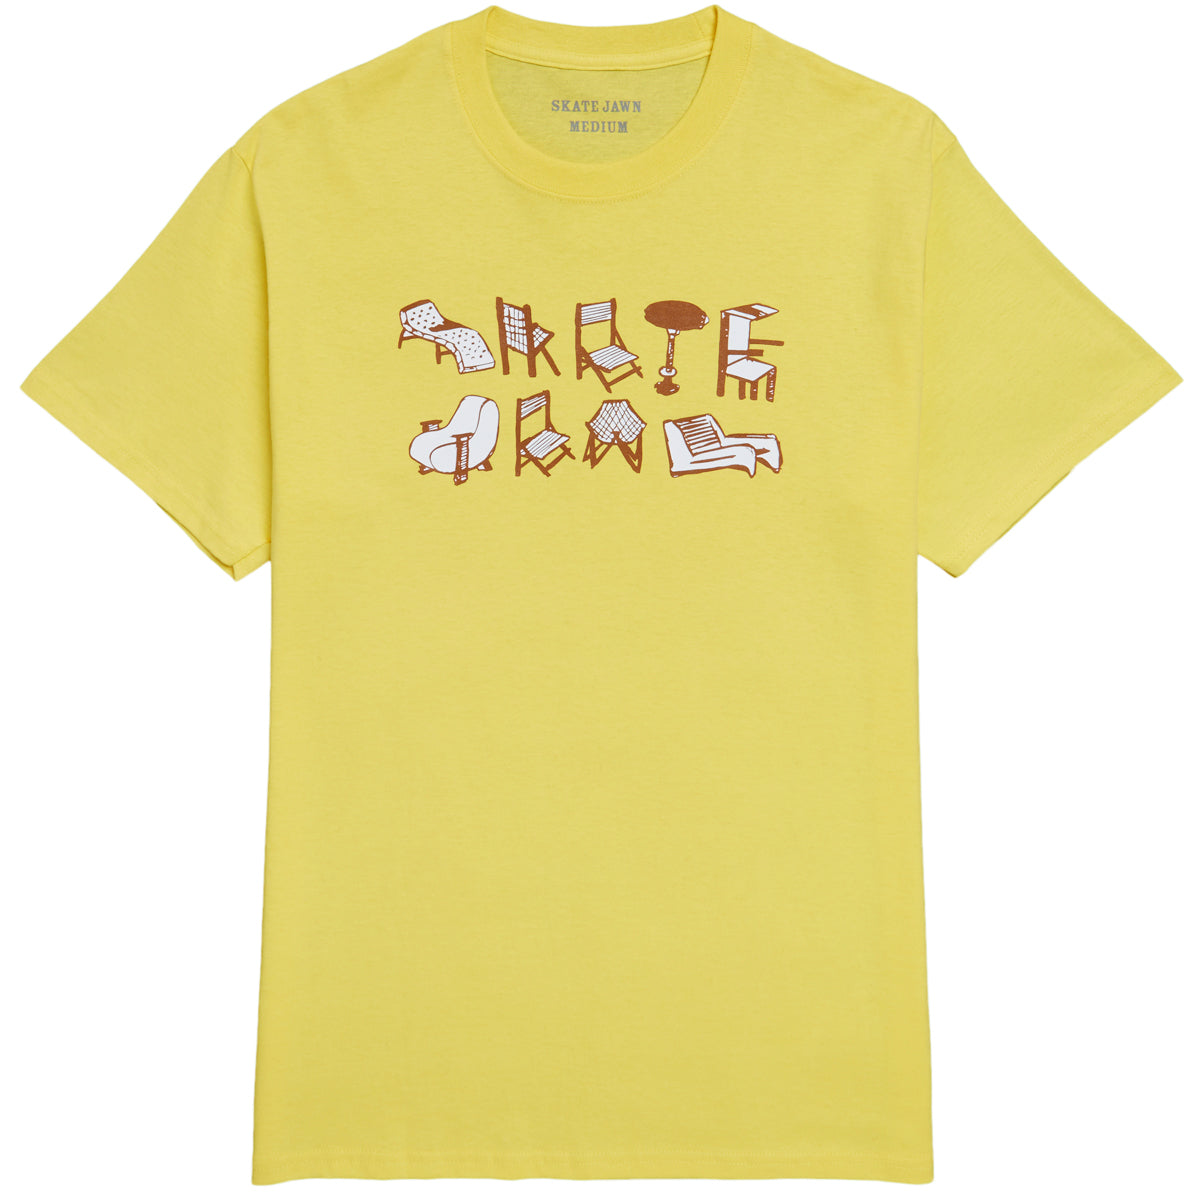 Skate Jawn Chairs T-Shirt - Yellow image 1